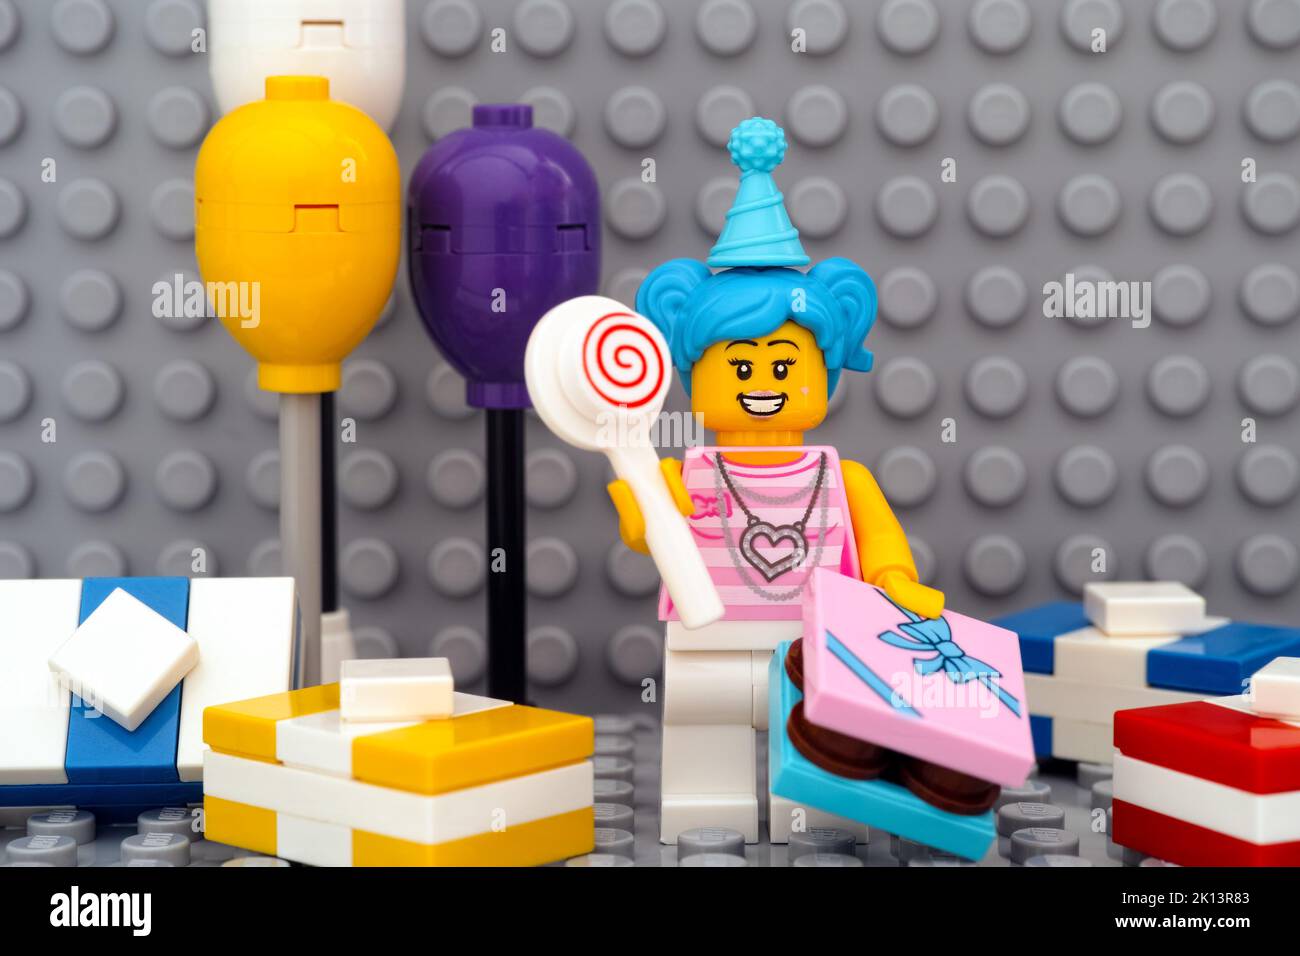 Tambov, Russian Federation - January 17, 2021 A Lego birthday girl minifigure with lollipop, gifts, balloons against a gray baseplate background Stock Photo